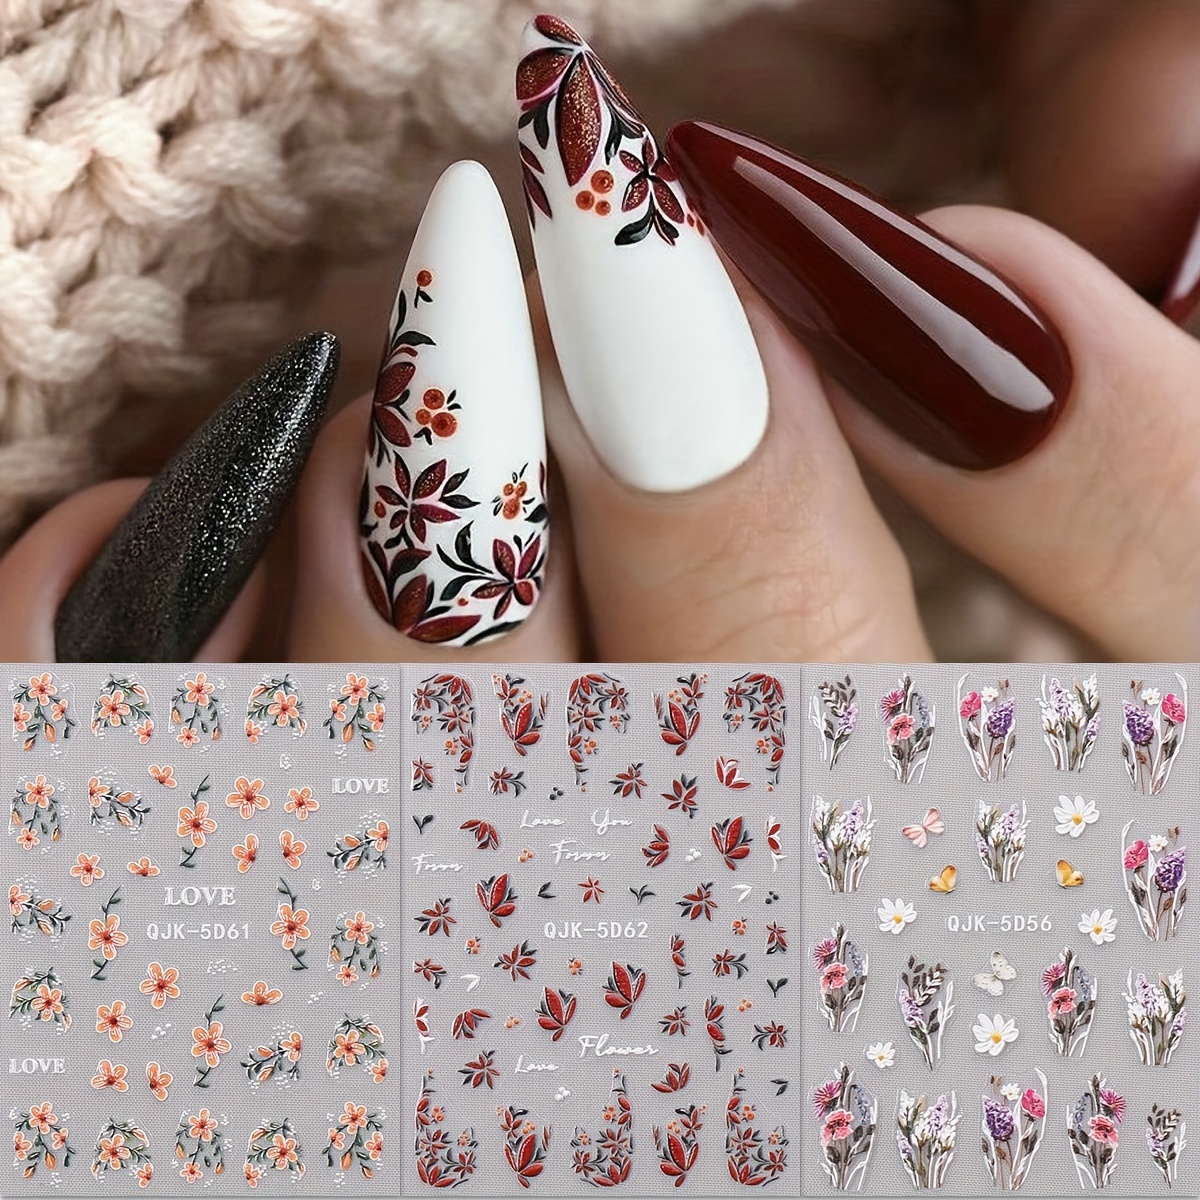 

3 Sheets 5d Embossed Nail Art Sticker Spring Flowers Nail Design Stickerlovely Flower Clusters, Orange Five-petal Flowers Acrylic Nails Design Manicure Decorations Easter